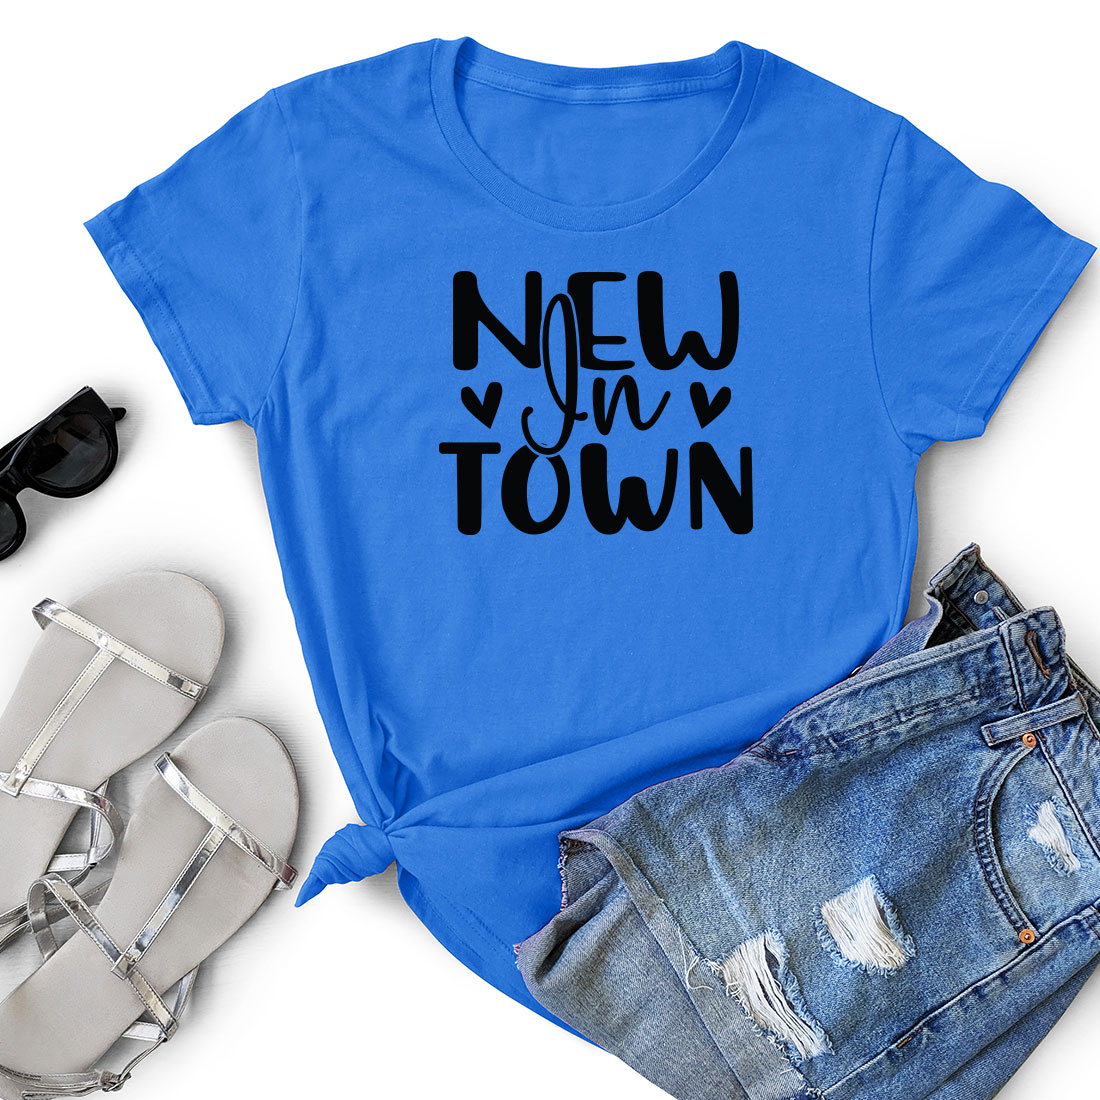 Blue t - shirt with the words new town printed on it.